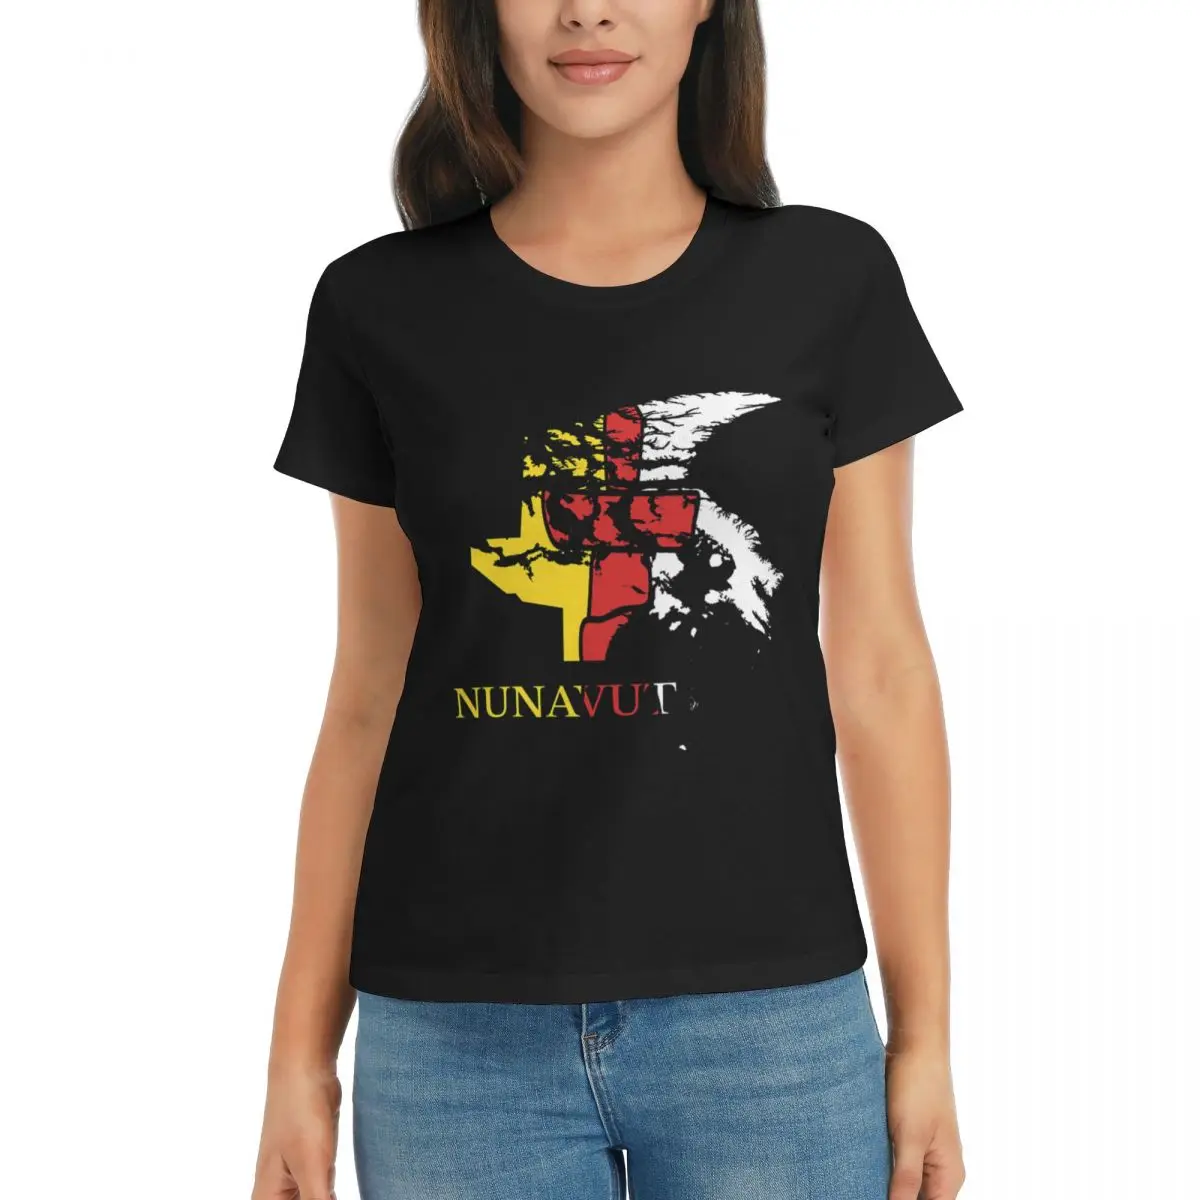 

Nunavut Flag Map, NU, Canada 282-3 Sports Black Graphic Vintage Top tee High grade Activity competition Eur Size